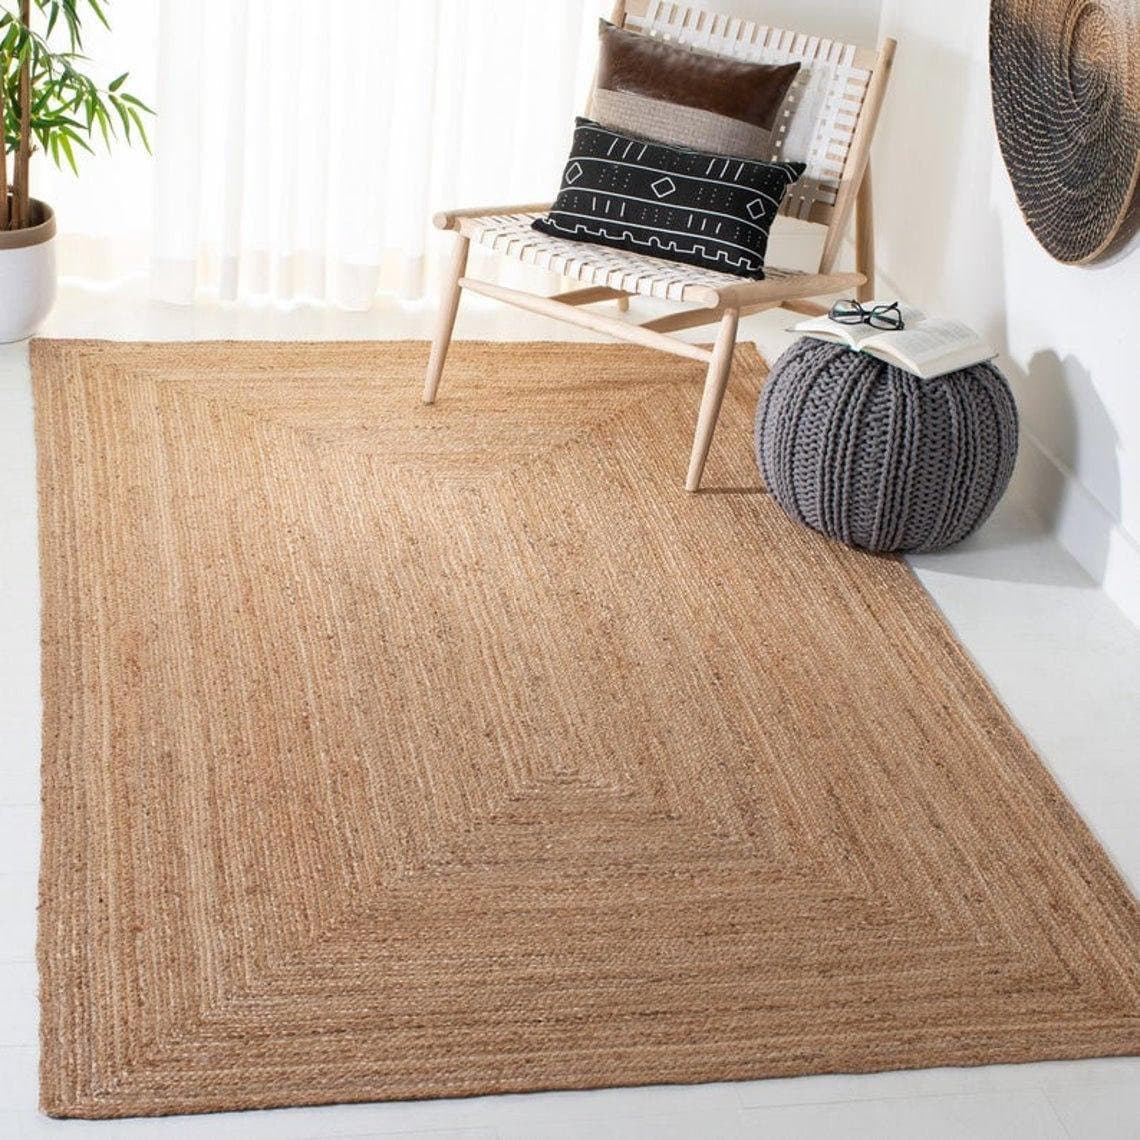 Handmade Natural Jute Rug: Ideal for Indoor & Outdoor Home Decor, Patio,  and Entryways  Rattan-Inspired Eco-Friendly Jute Rugs - the perfect fusion  of natural charm and durability to your living spaces